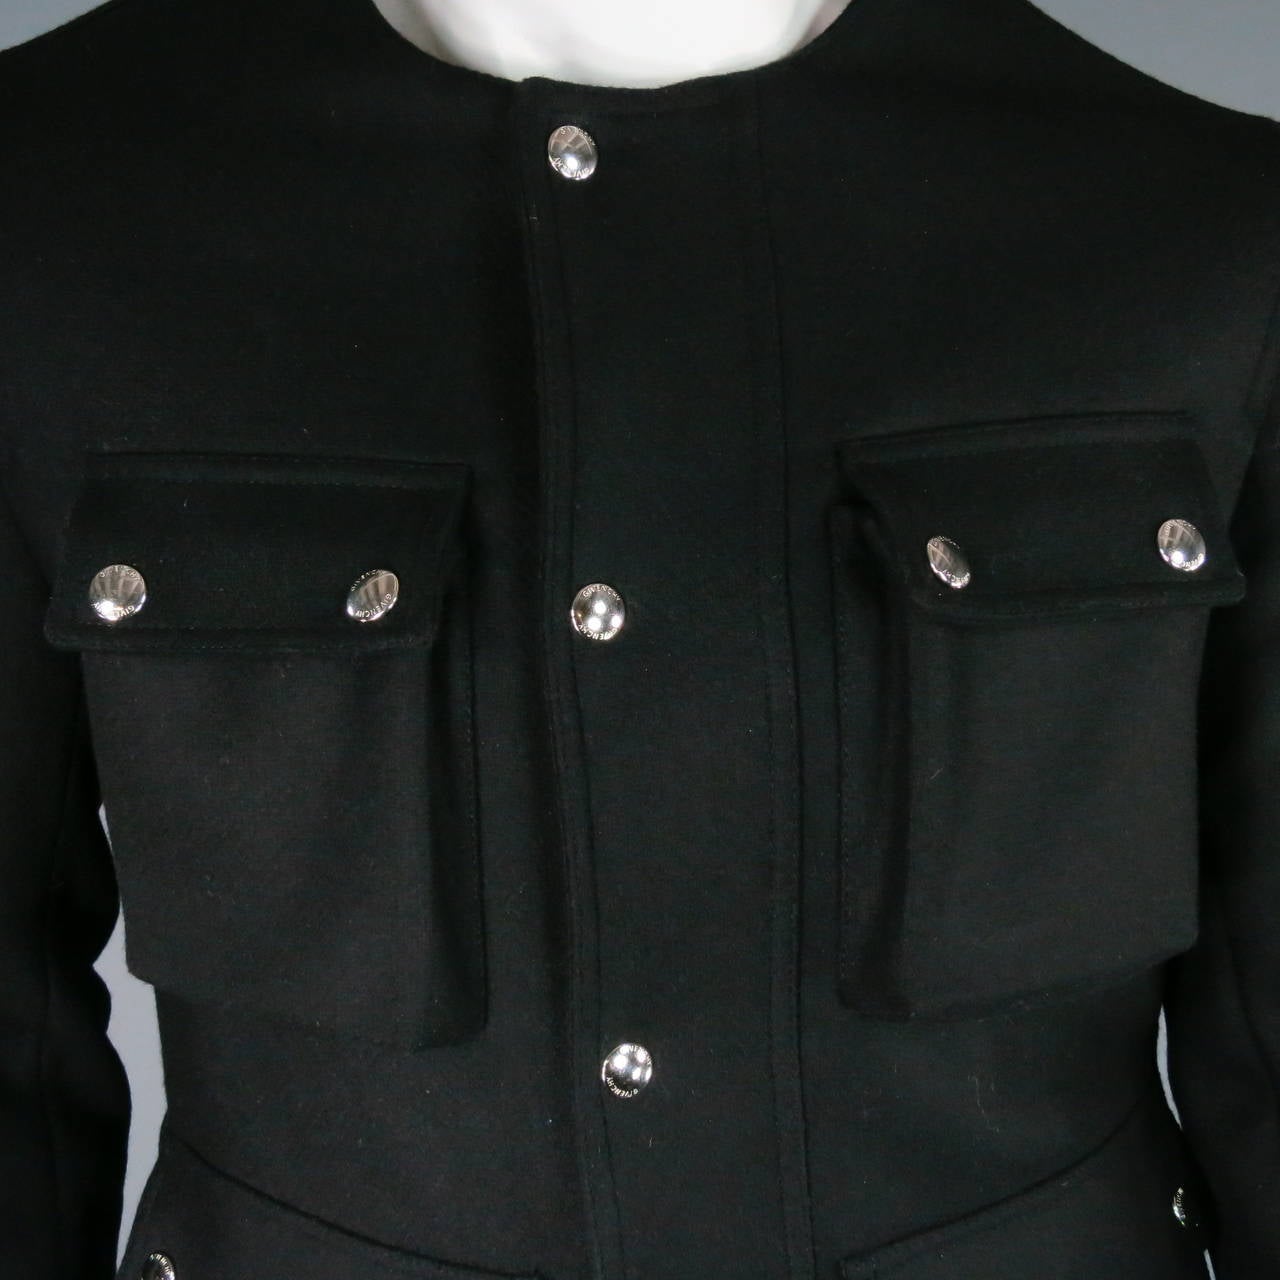 This fantastic Fall 2013 Givenchy jacket features a black wool blend material. Designed with four fully functioning front pockets with snap closures, two side and two inseam pockets with zipper closure. The garment itself, features a snap button